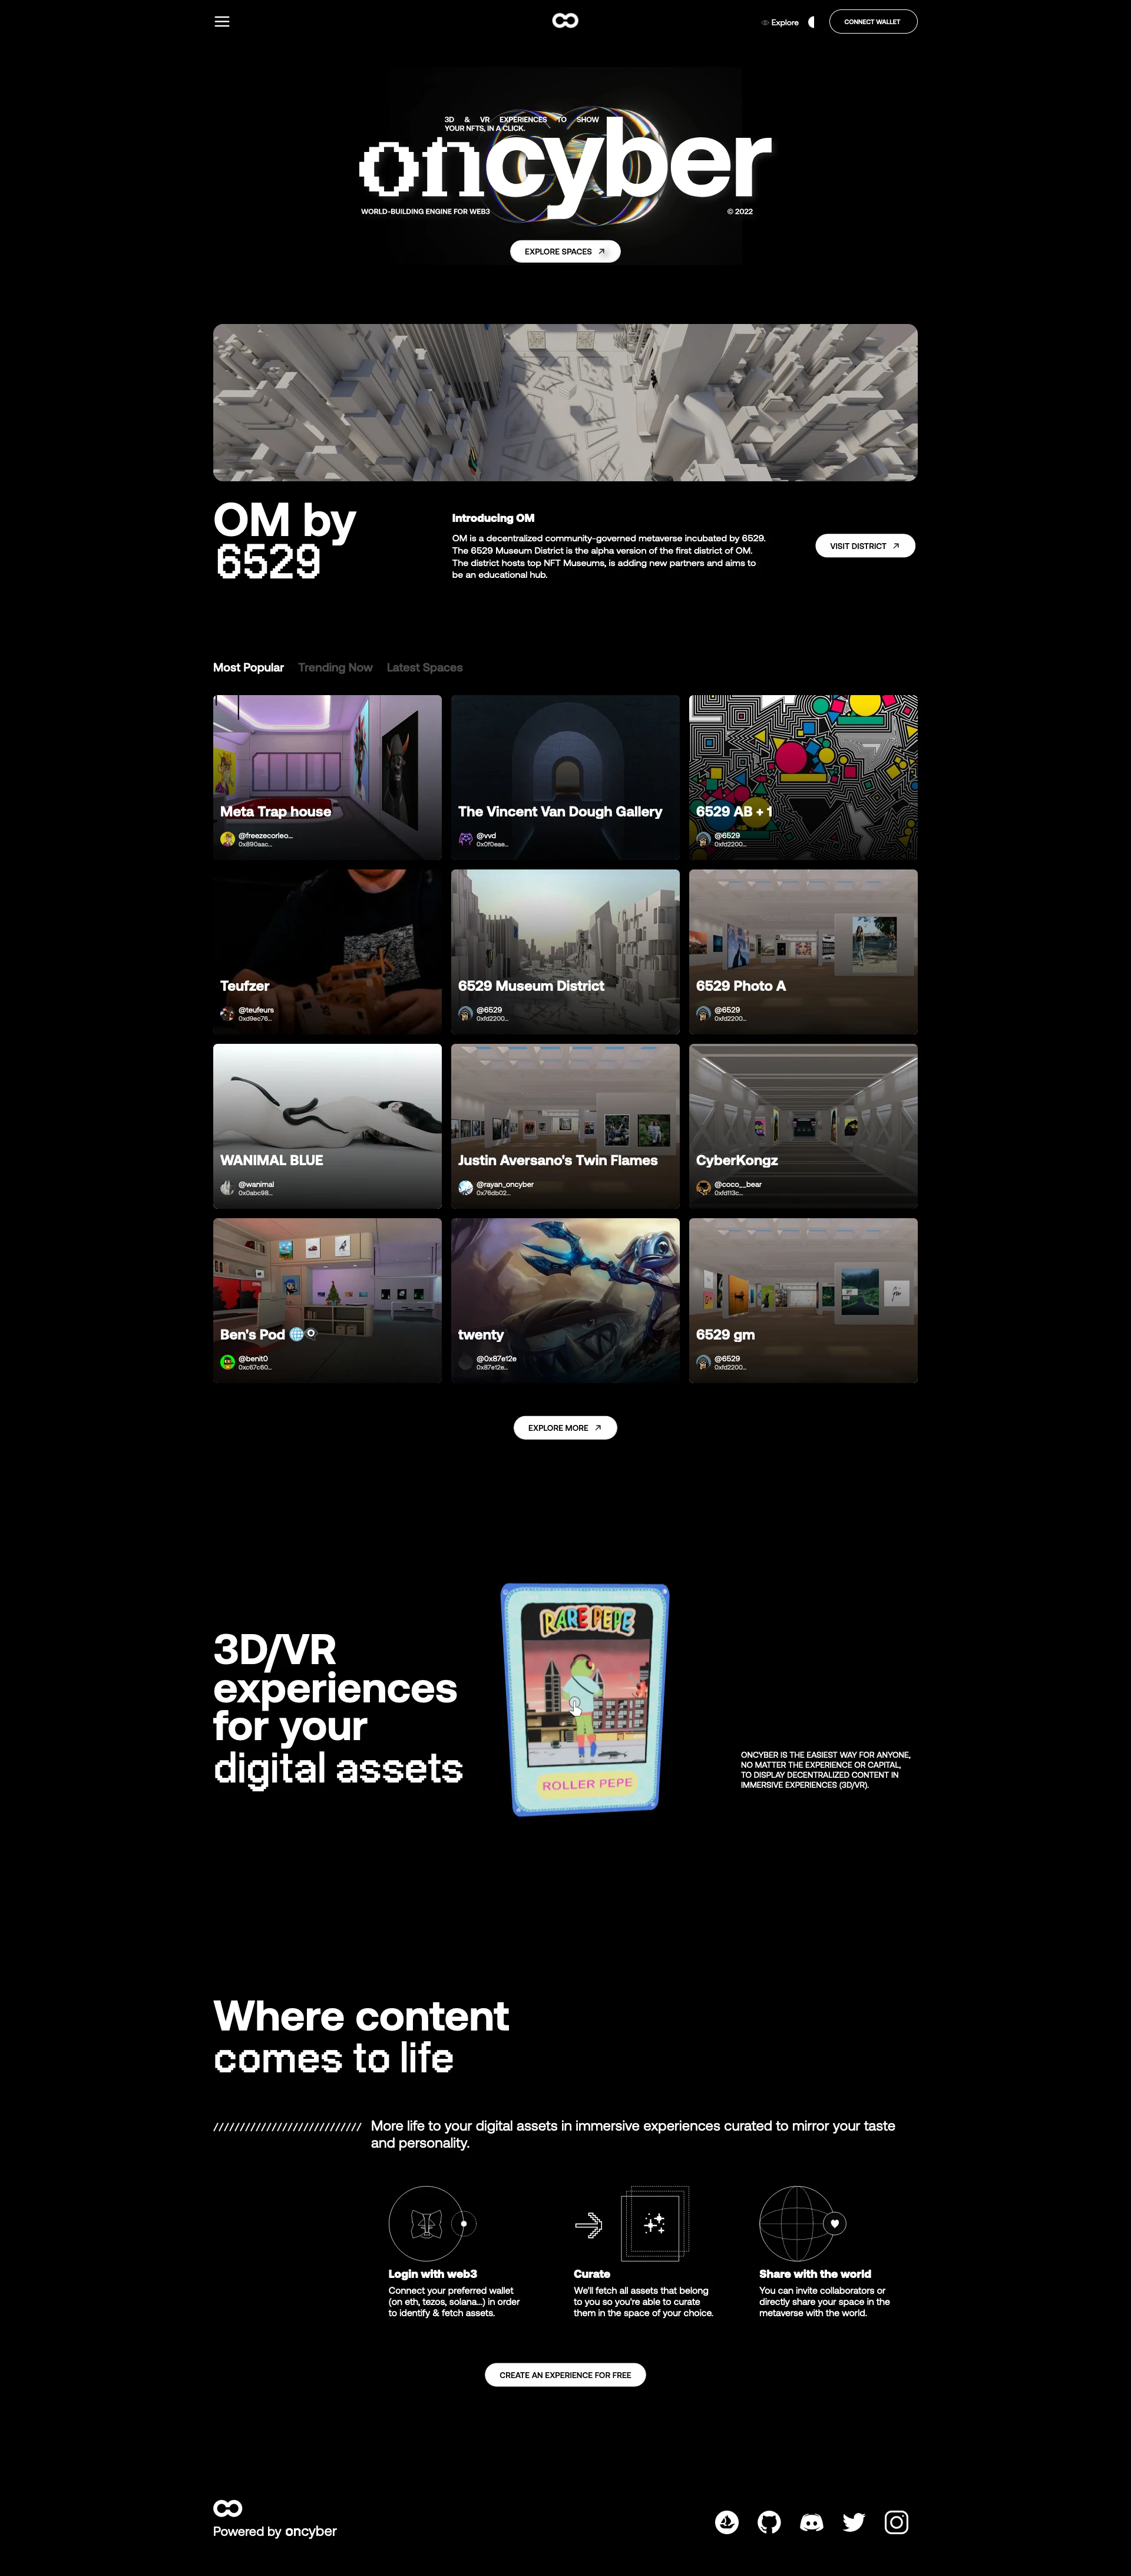 ONCYBER Landing Page Example: A digital world for creators, oncyber is the easiest way for artists and collectors to show their digital assets (NFTs) in fully immersive experiences (3D/VR), for free.